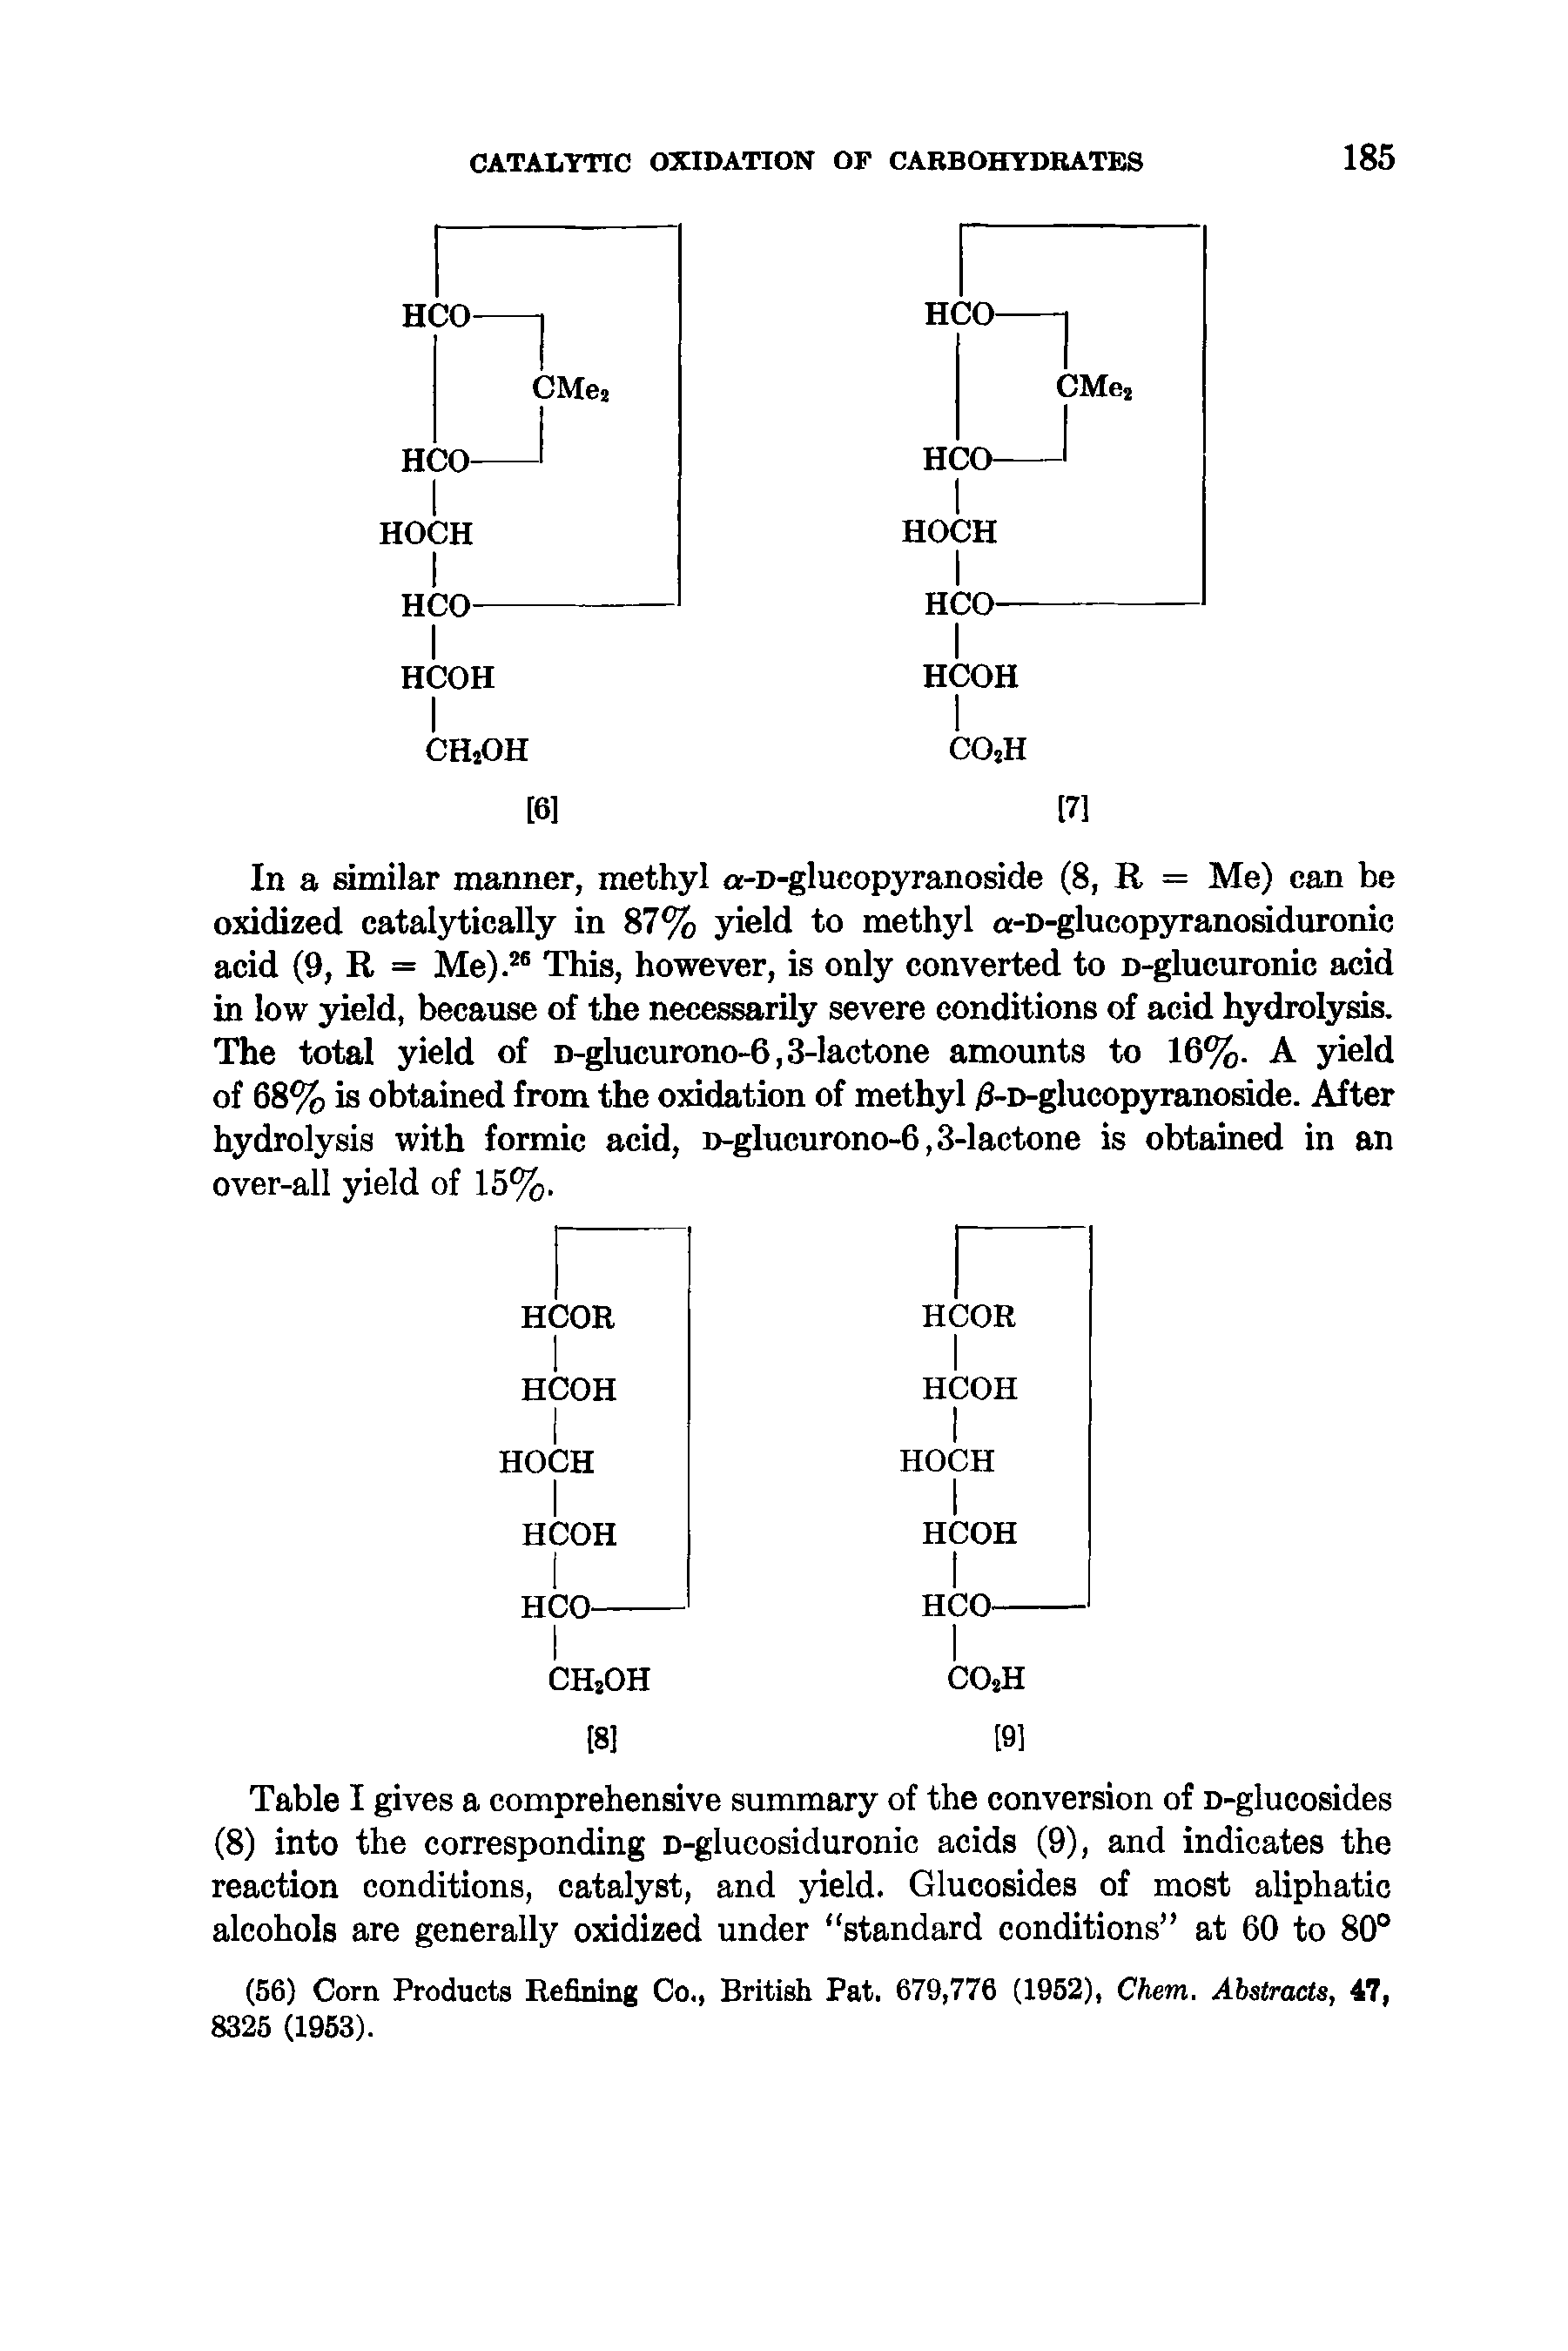 Table I gives a comprehensive summary of the conversion of D-glucosides (8) into the corresponding D-glucosiduronic acids (9), and indicates the reaction conditions, catalyst, and yield. Glucosides of most aliphatic alcohols are generally oxidized under standard conditions at 60 to 80°...